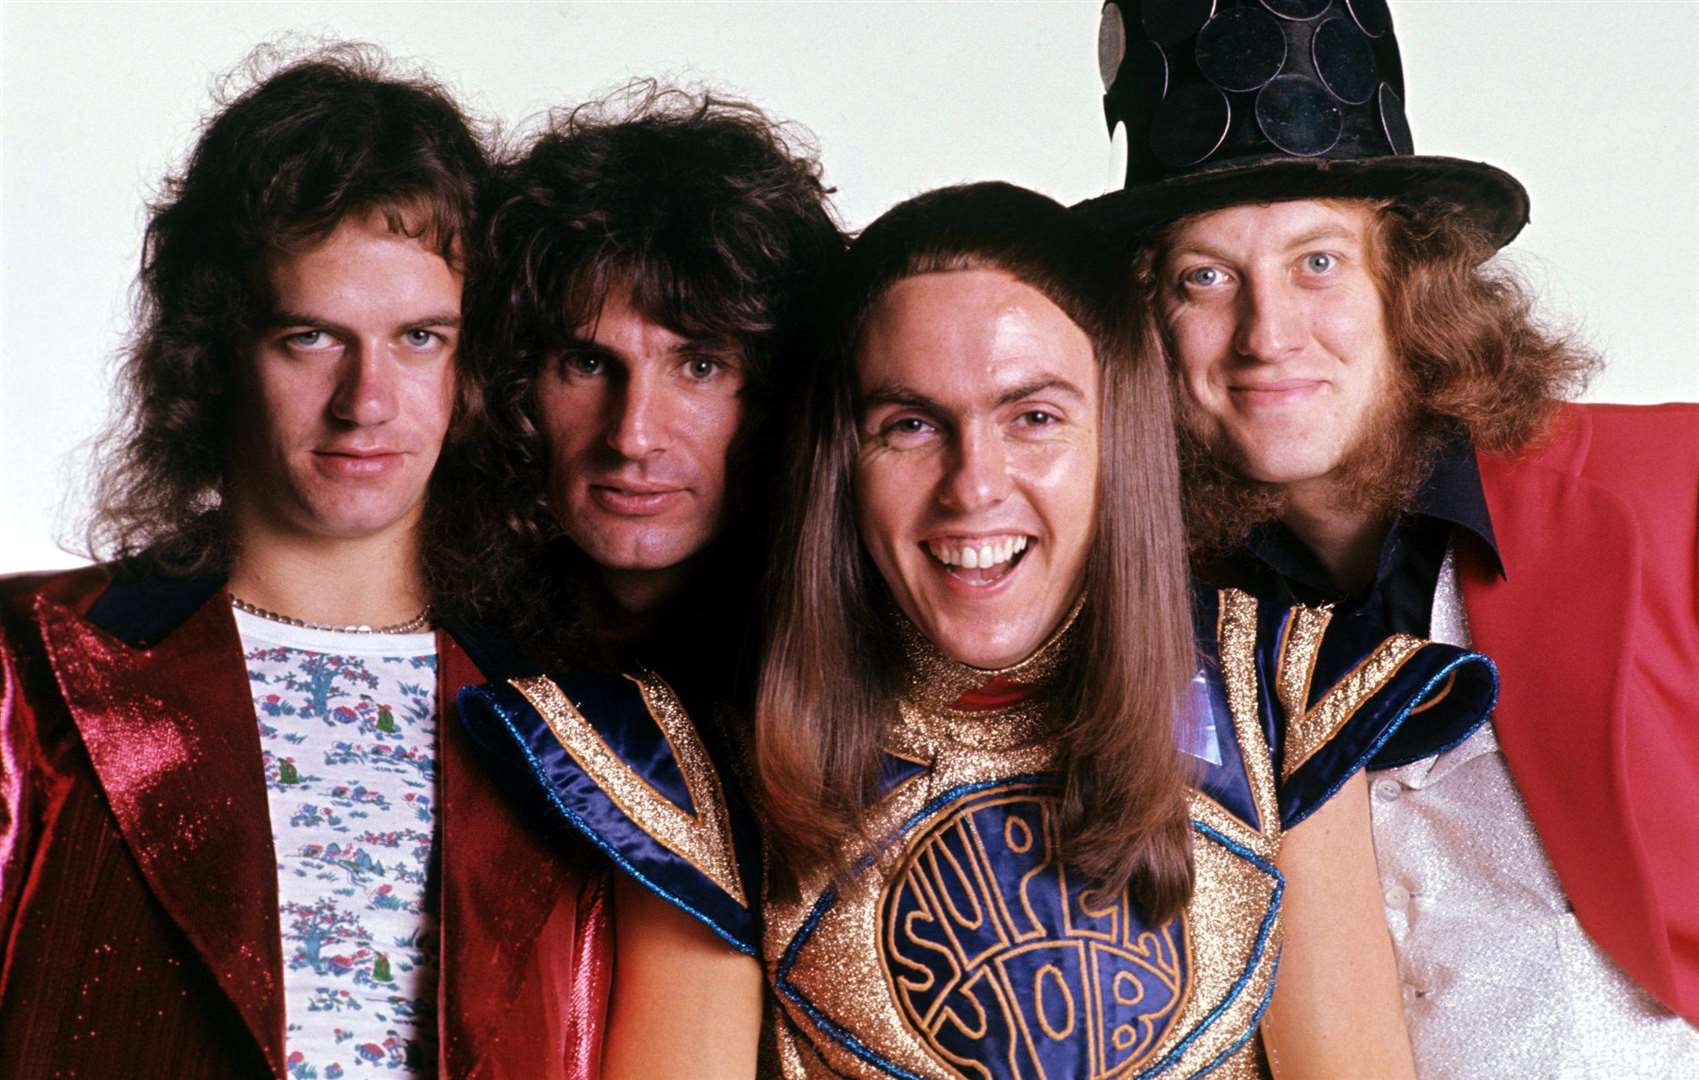 Slade pictured in 1973, the year they achieved their Christmas No. 1. Picture: Roger Bamber/Shutterstock